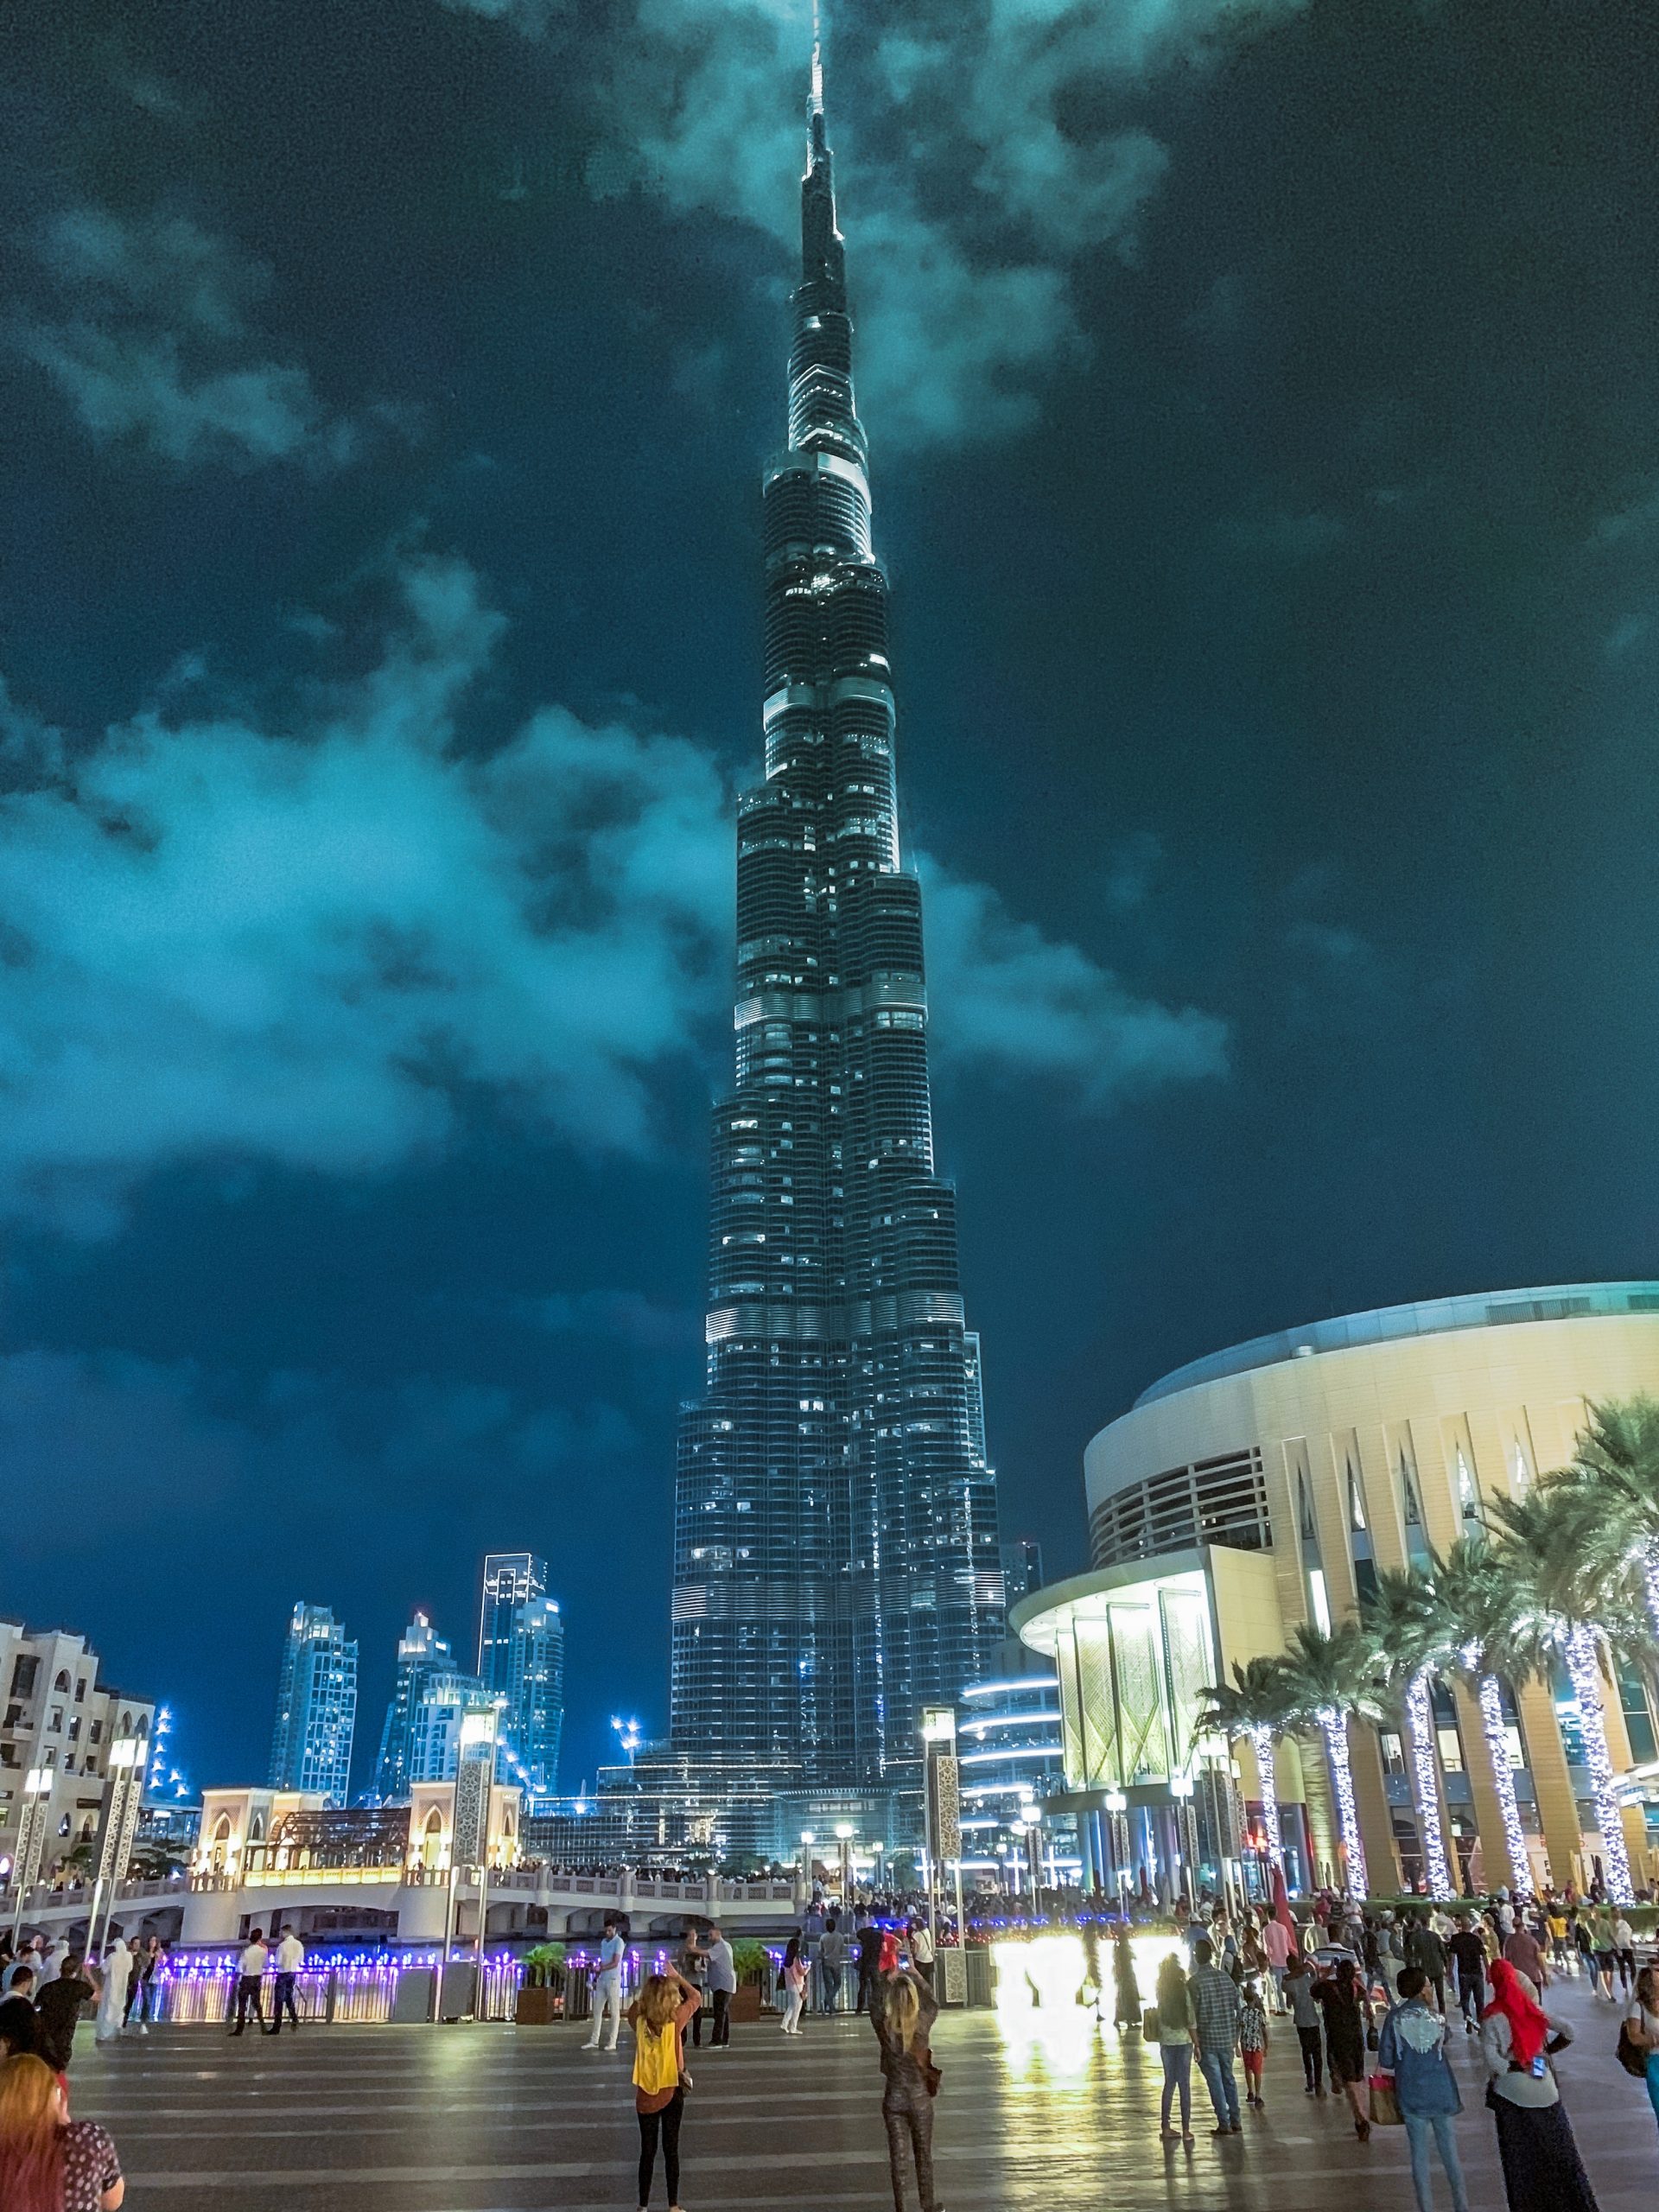 Flamebar used in Burj Khalifa for smoke extraction ducts